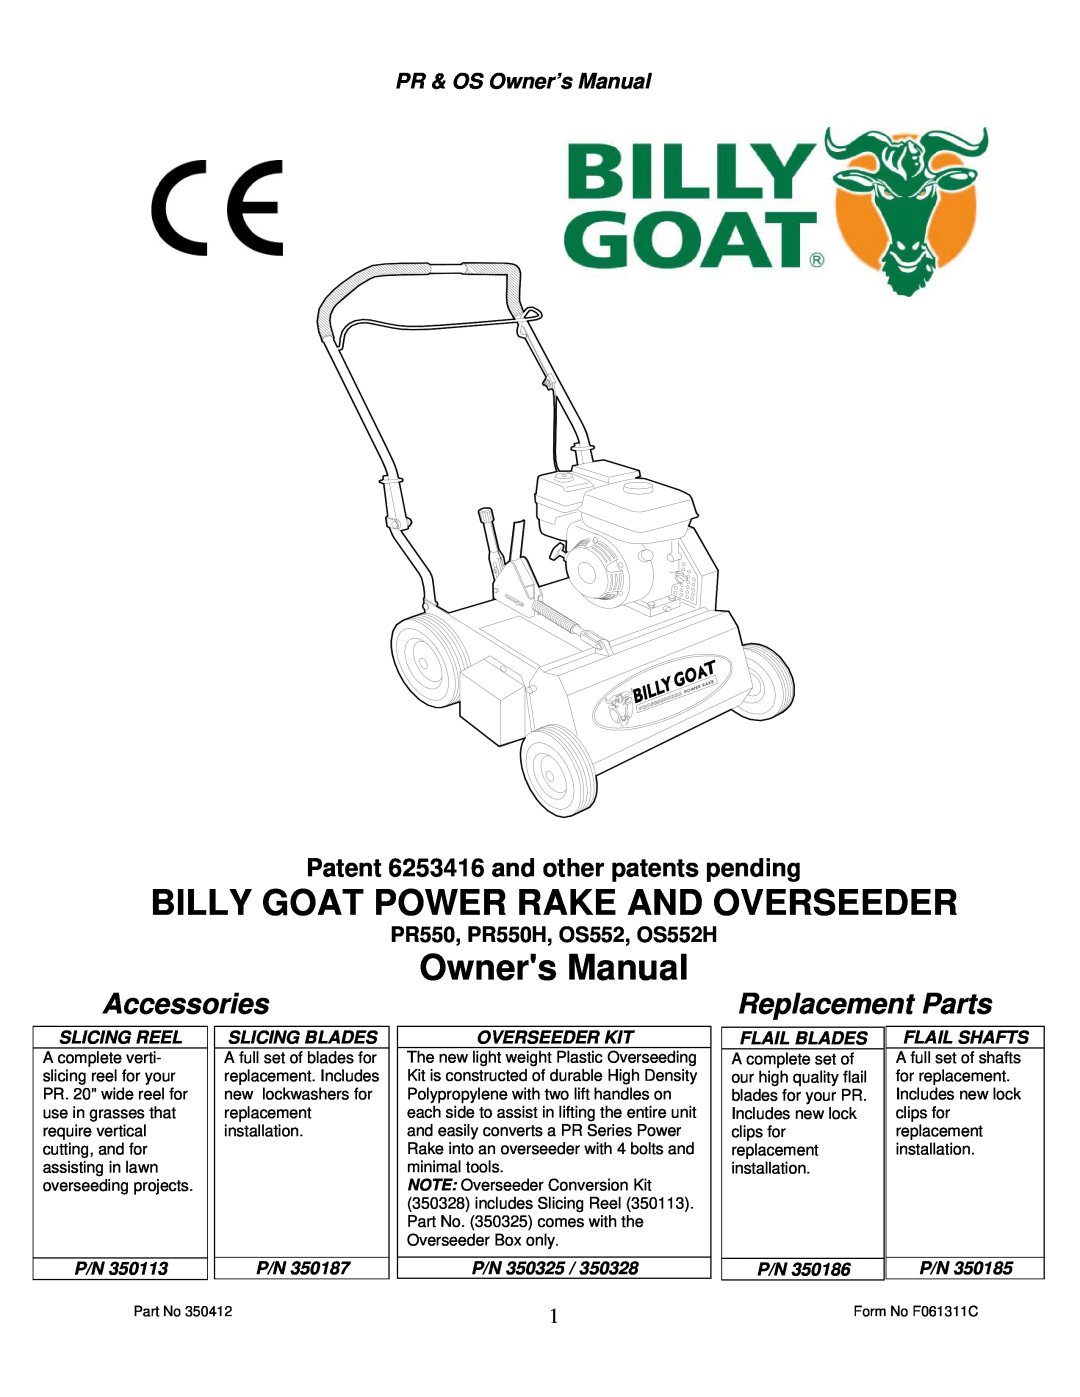 Billy Goat owner manual Patent 6253416 and other patents pending, PR550, PR550H, OS552, OS552H, Accessories, P/N 